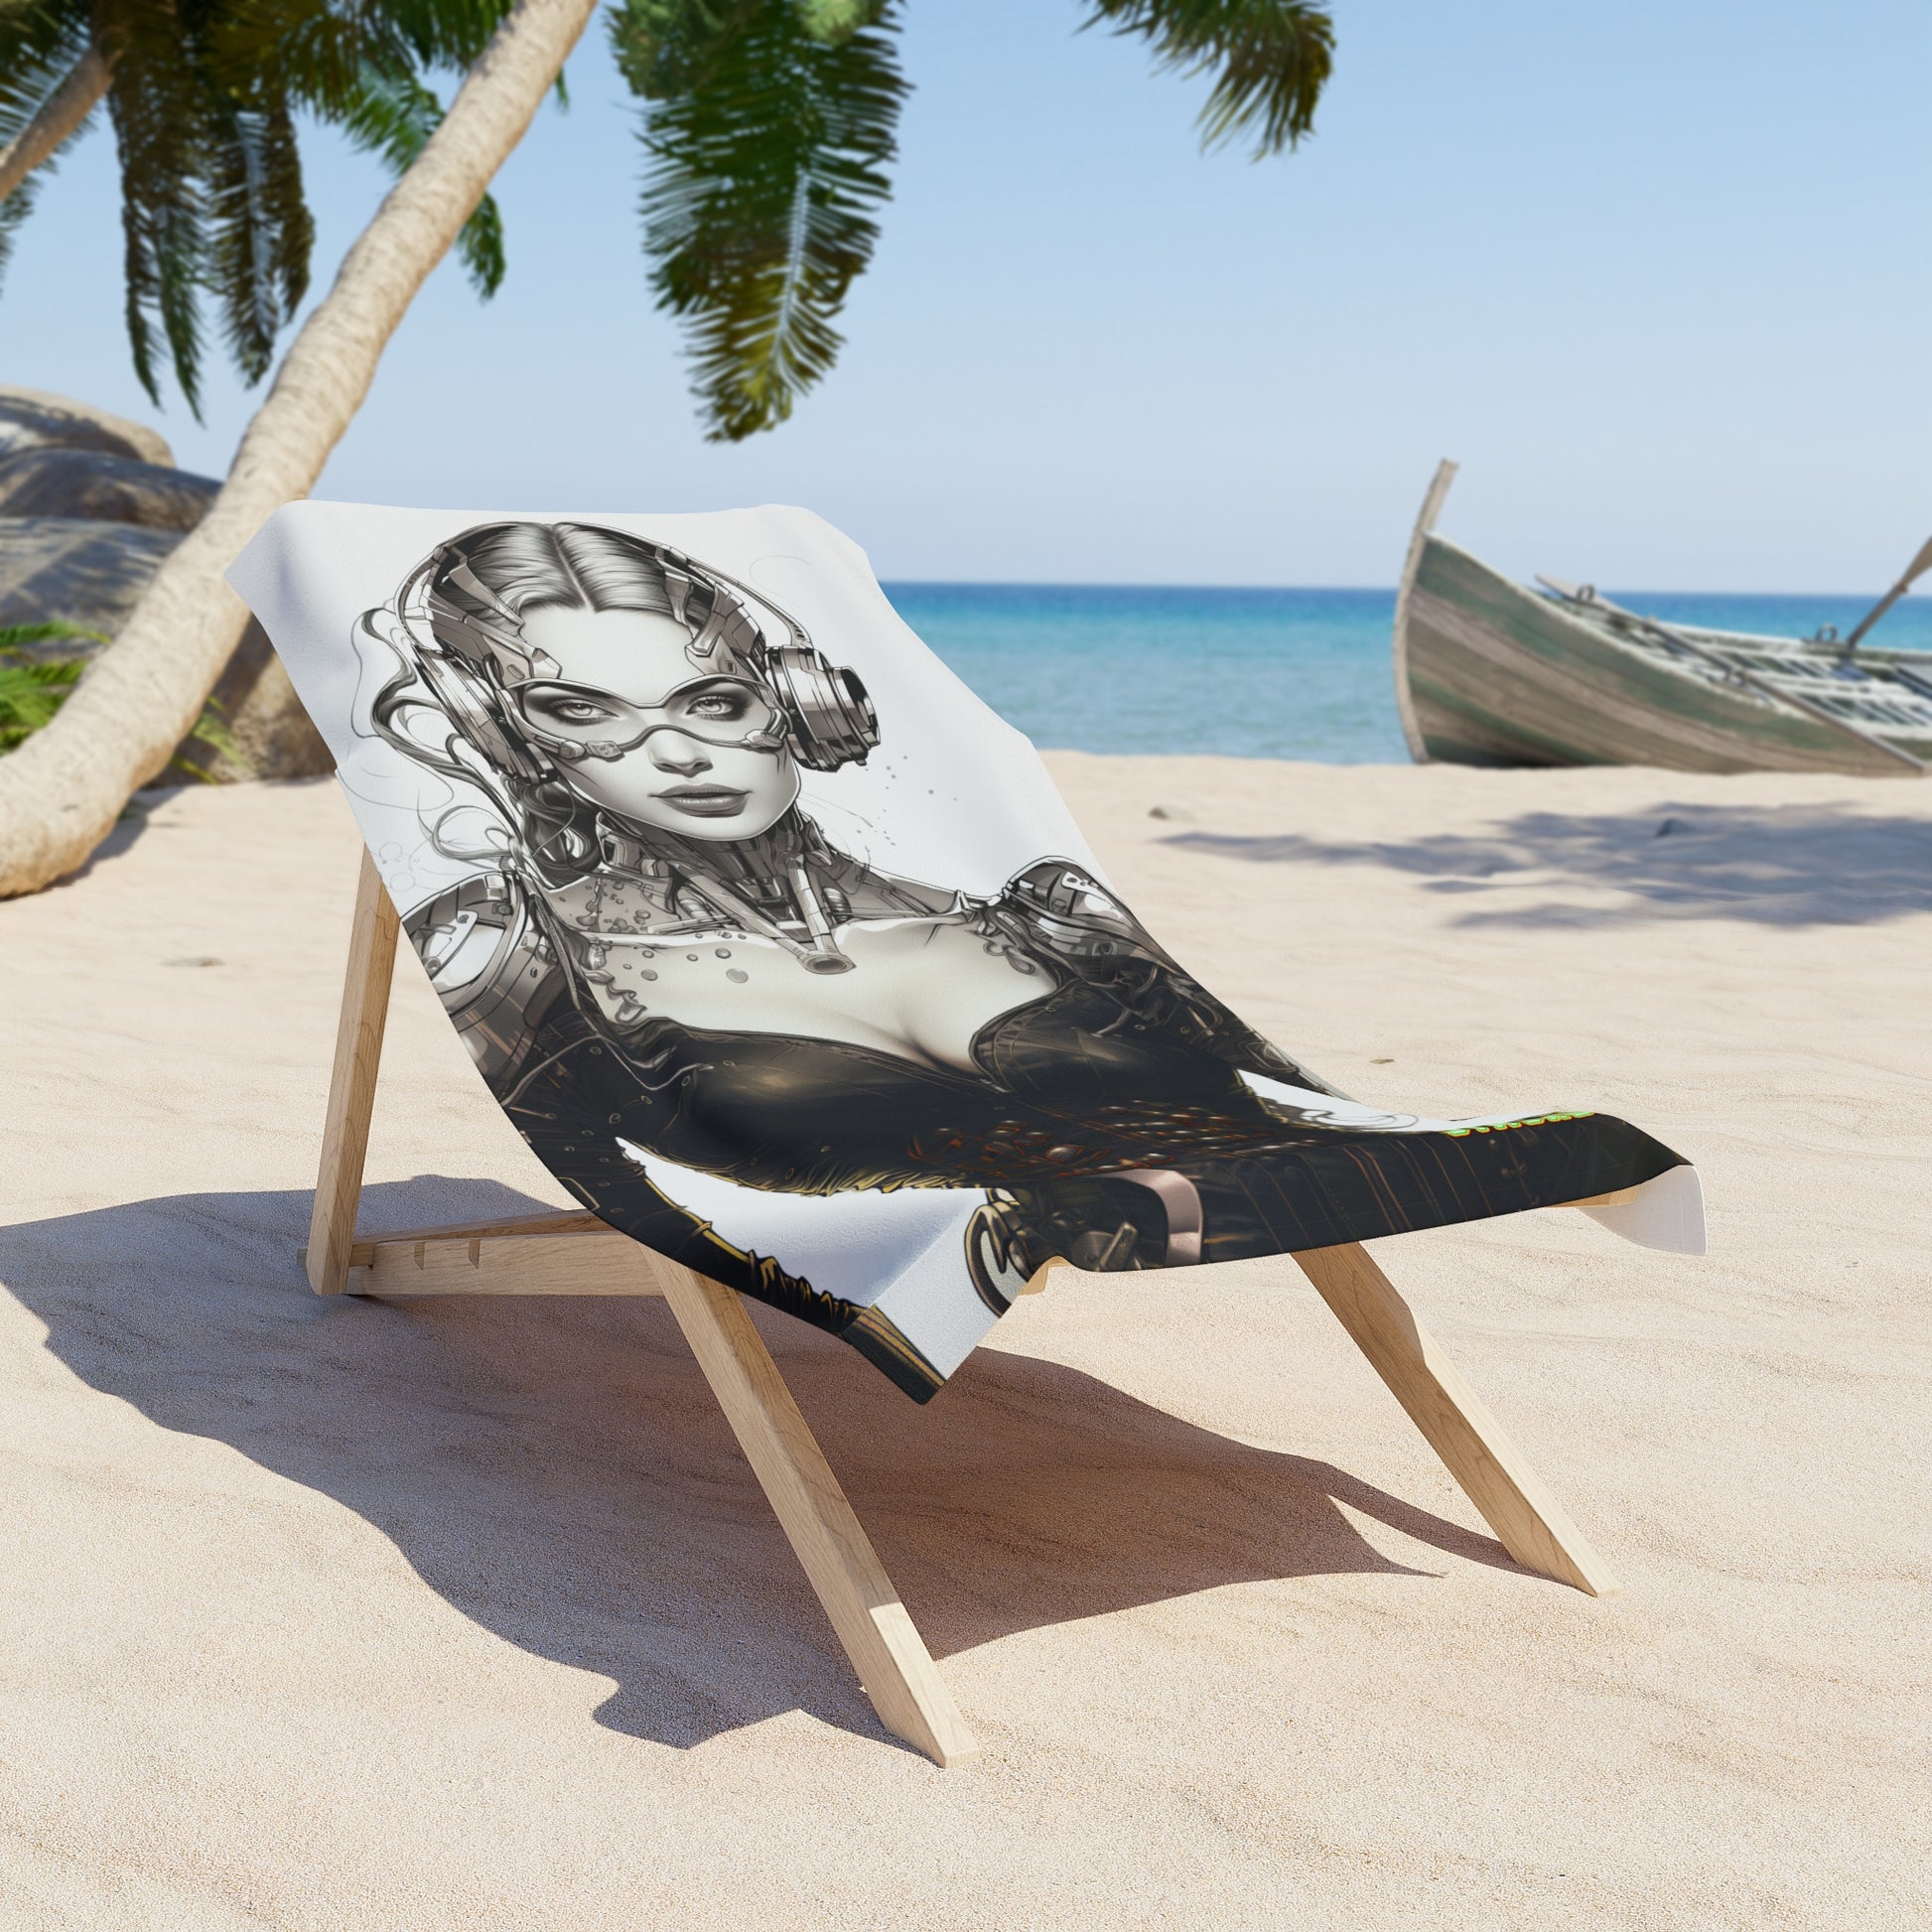 Dive into Luxury with Silver Stunner Beach Towel – Your Essential Beach Companion! Experience style, comfort, and heroism with this Stashbox Character Design #001. #StashboxFashion #SilverStunnerTowel #BeachHero